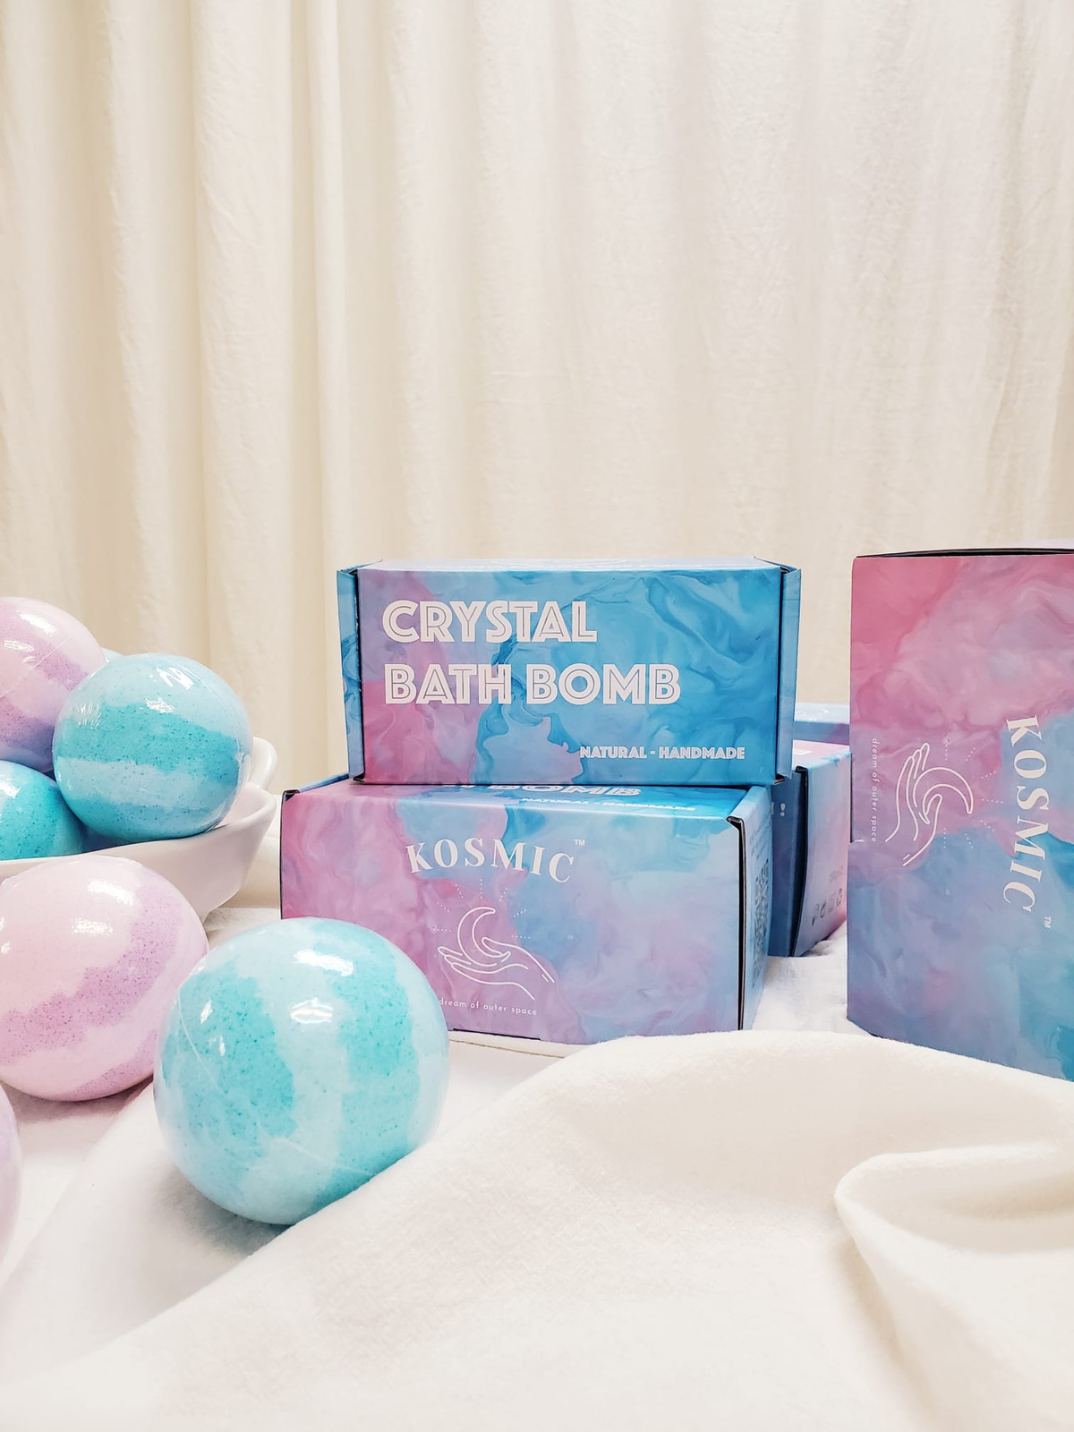 koscmicland crystal bath bomb eco-friendly biodegradable with recyclable packaging shop beauty woman-owned brands